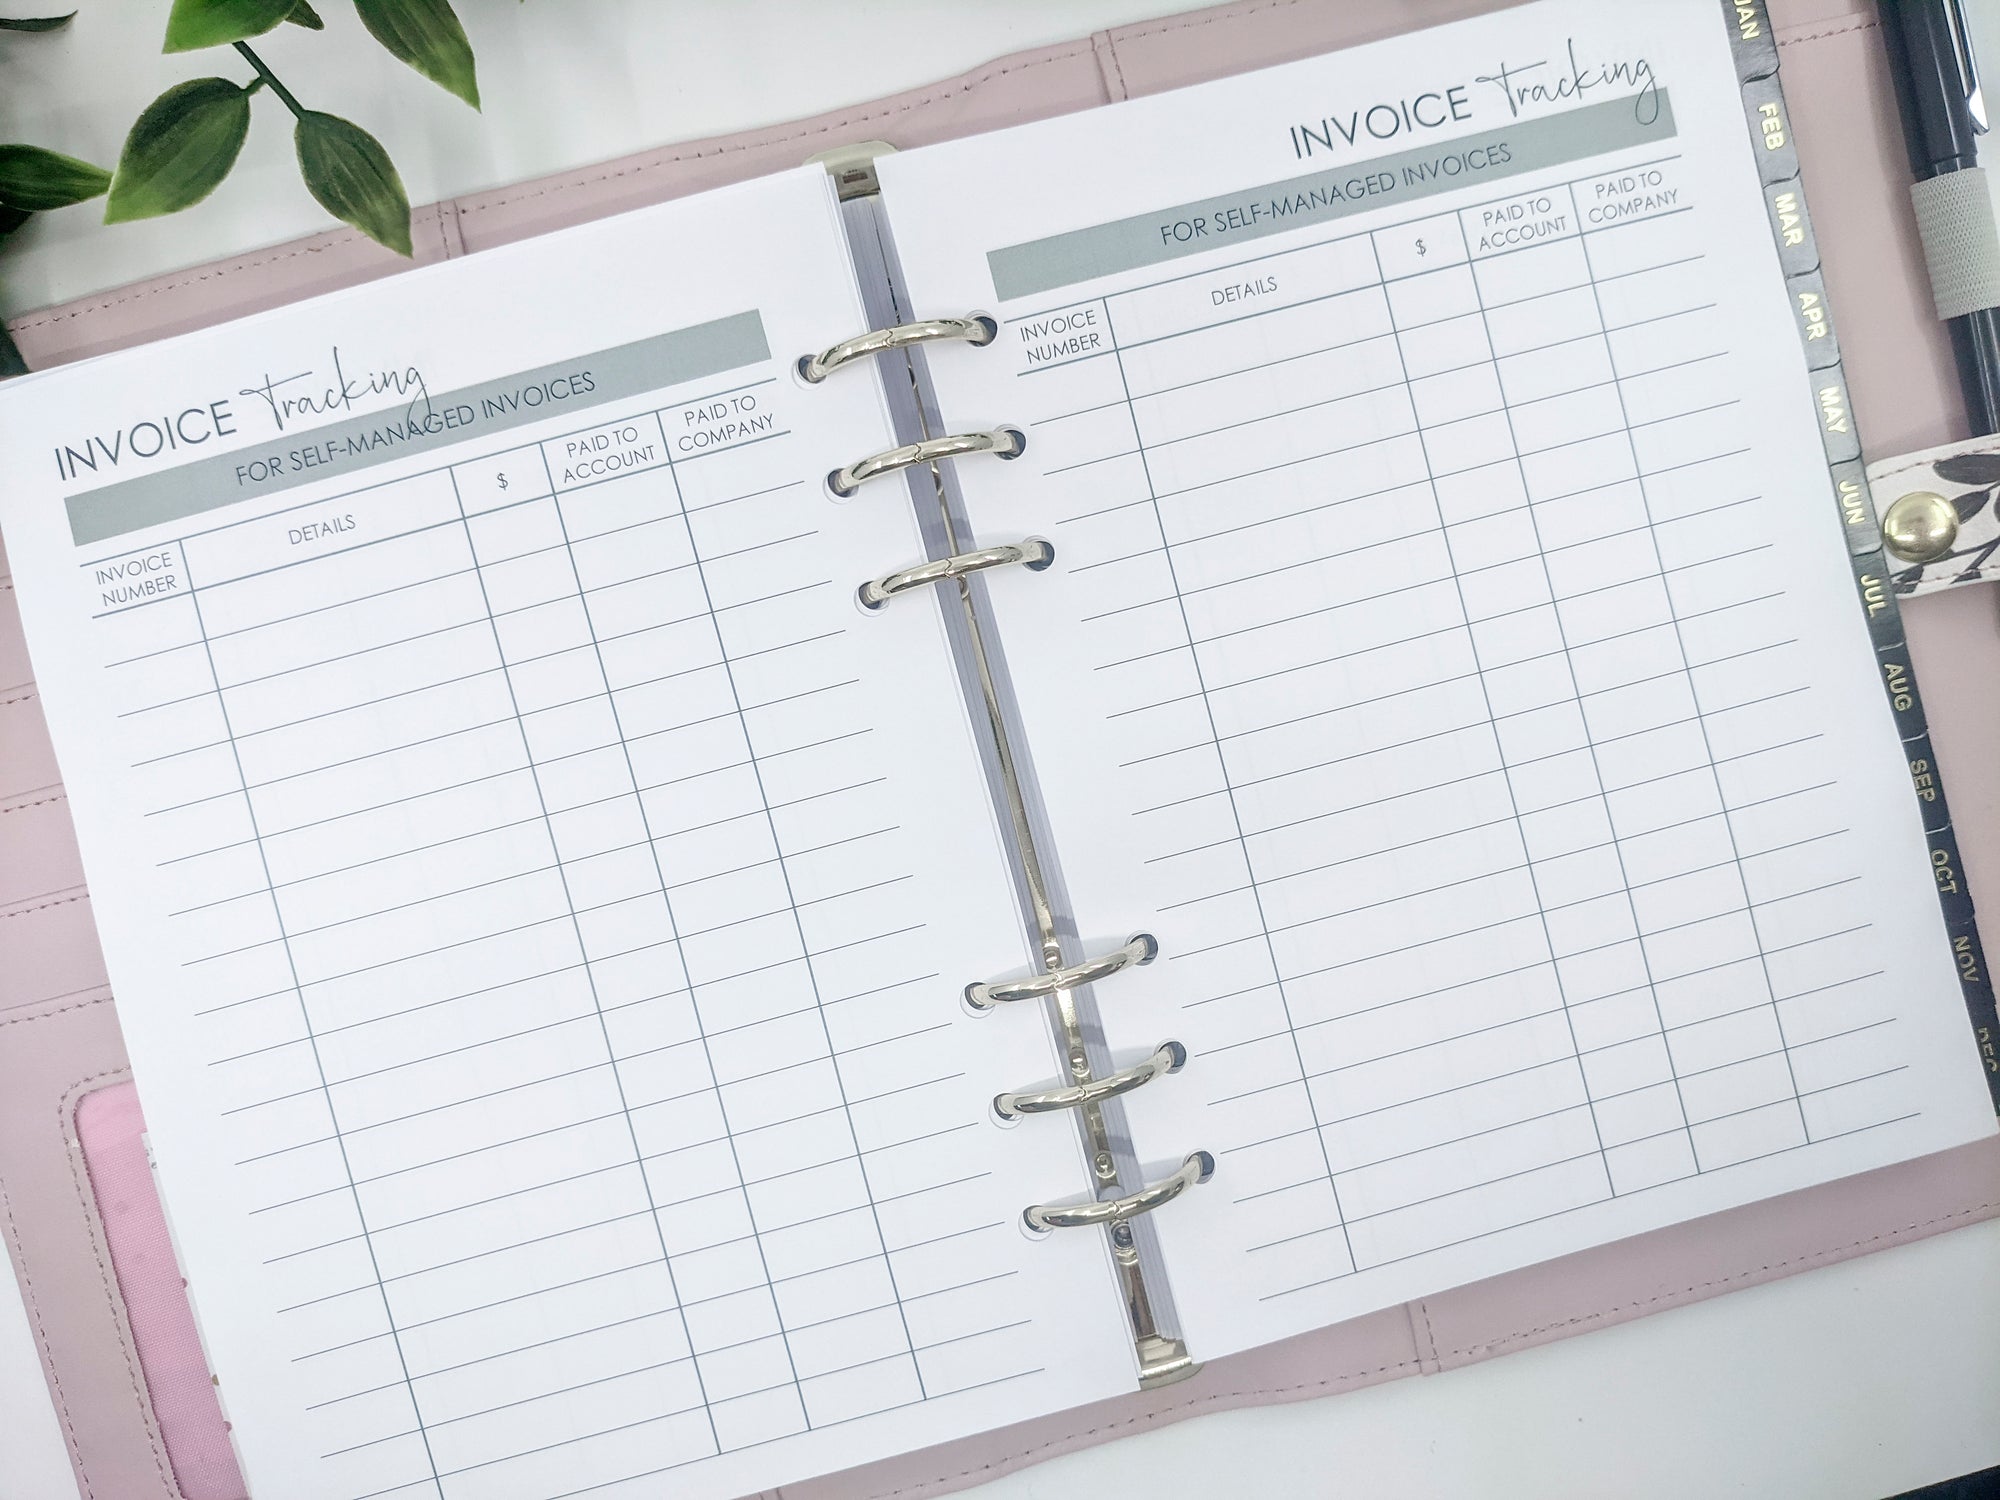 NDIS invoice tracking planner inserts